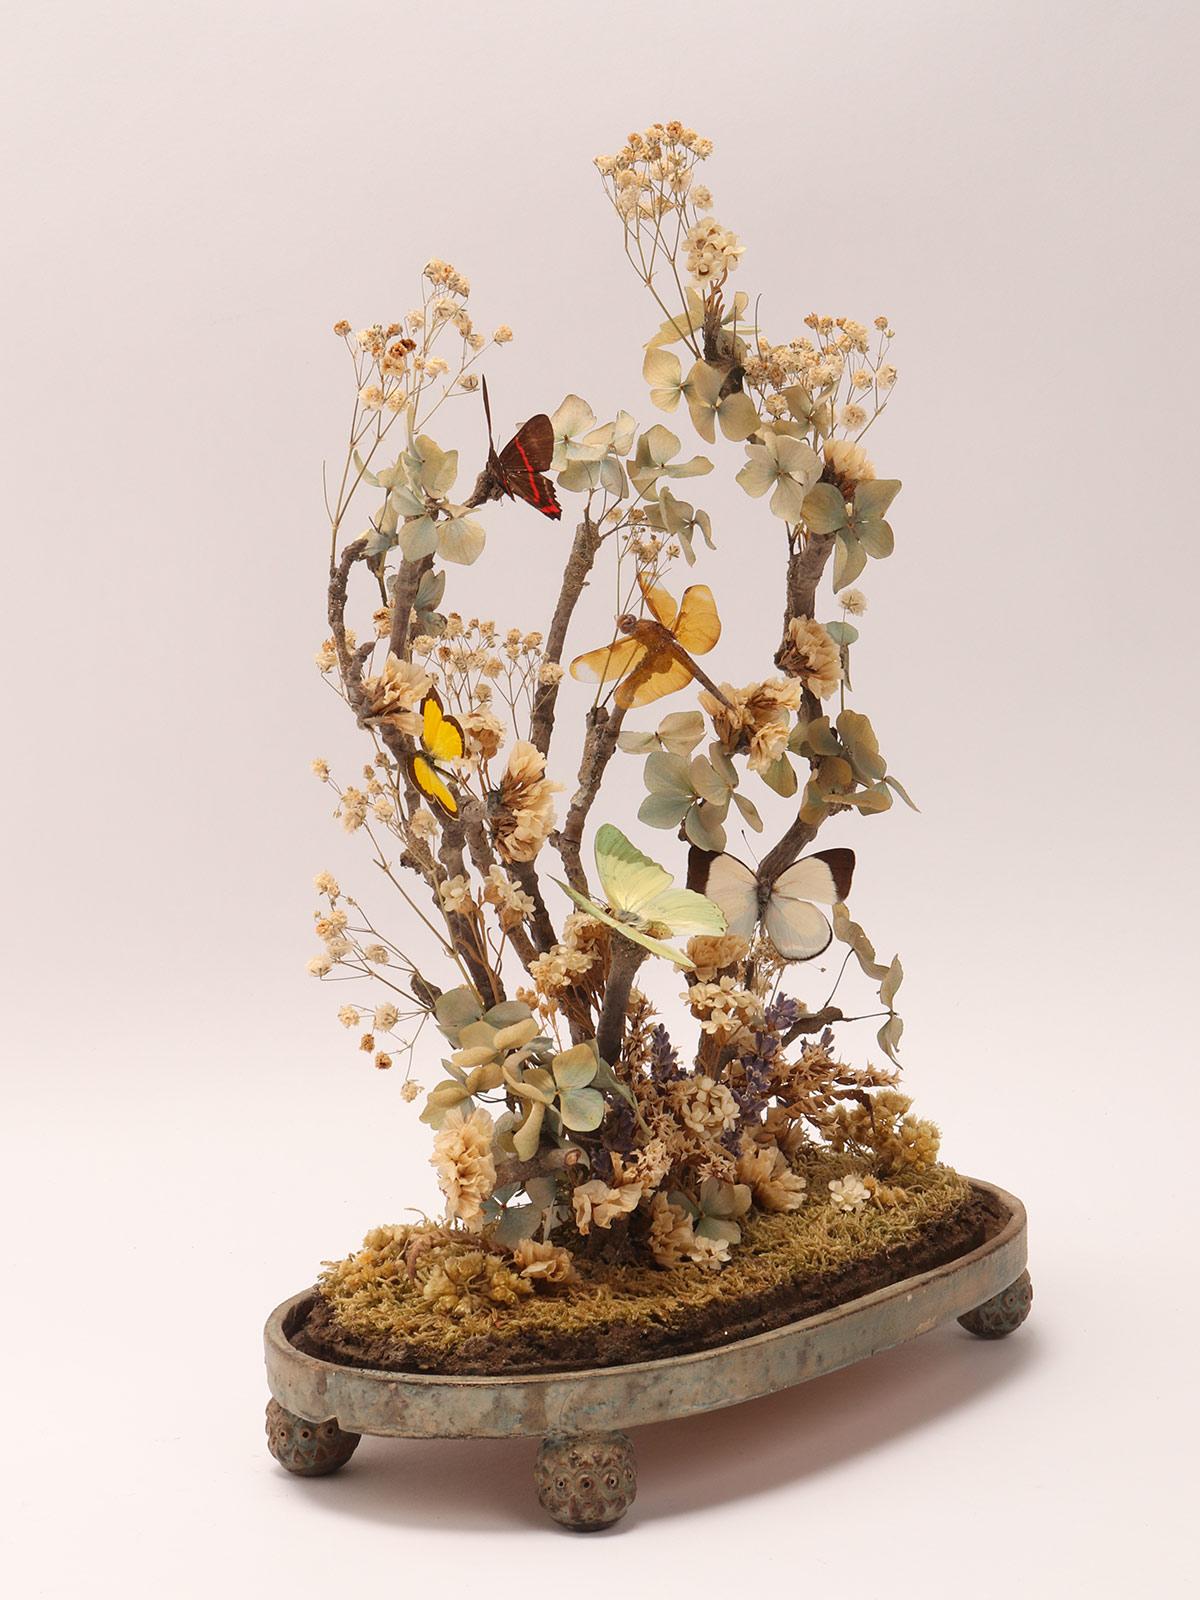 Animal Skin Diorama with Butterflies and Flowers, Italy 1870